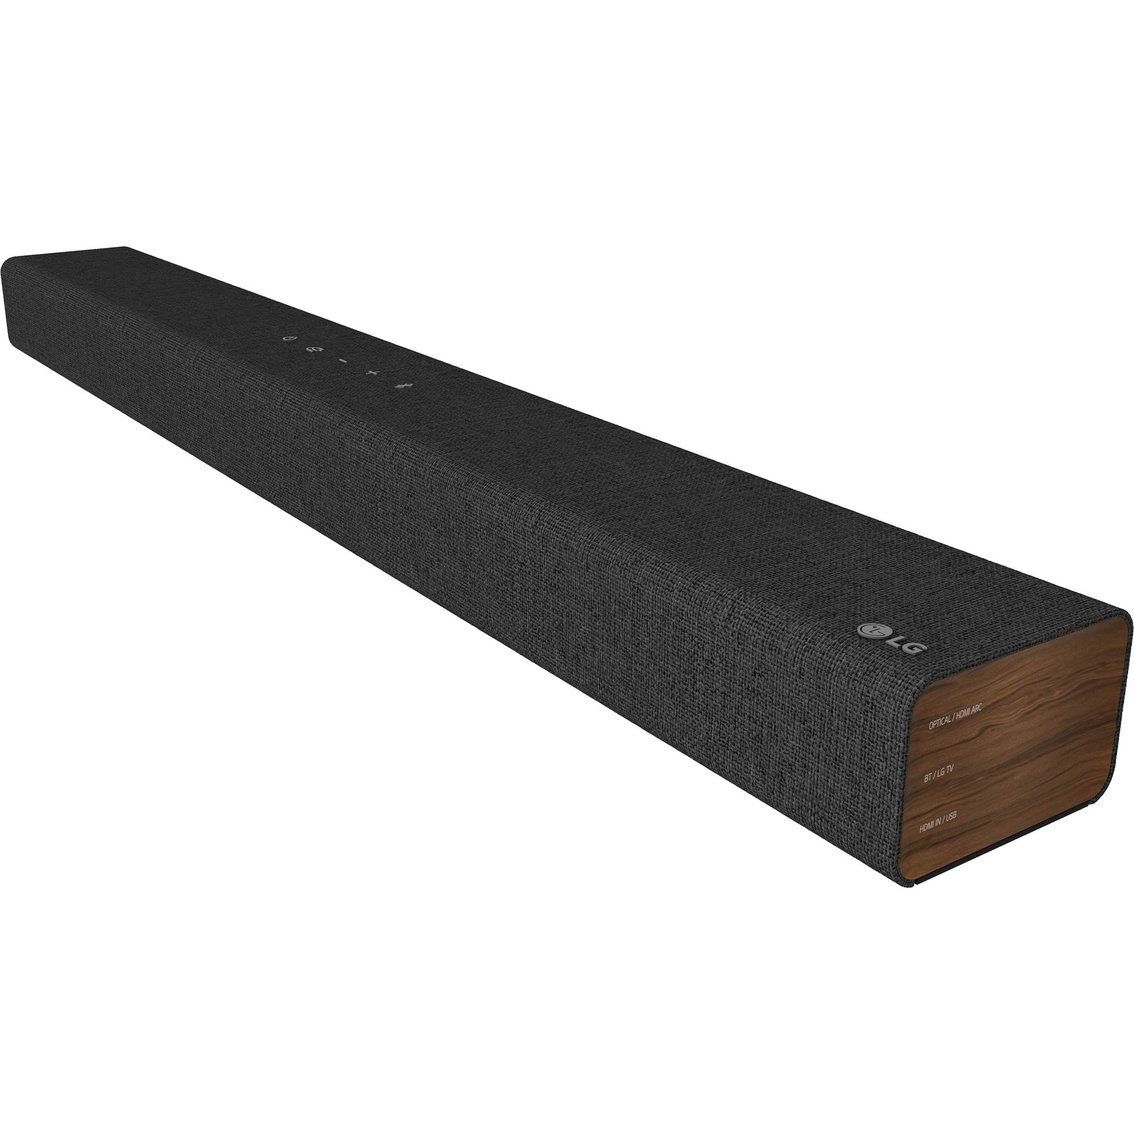 LG SP2 2.1 Channel 100W Sound Bar with Bluetooth and Built-In Subwoofer - Image 6 of 8